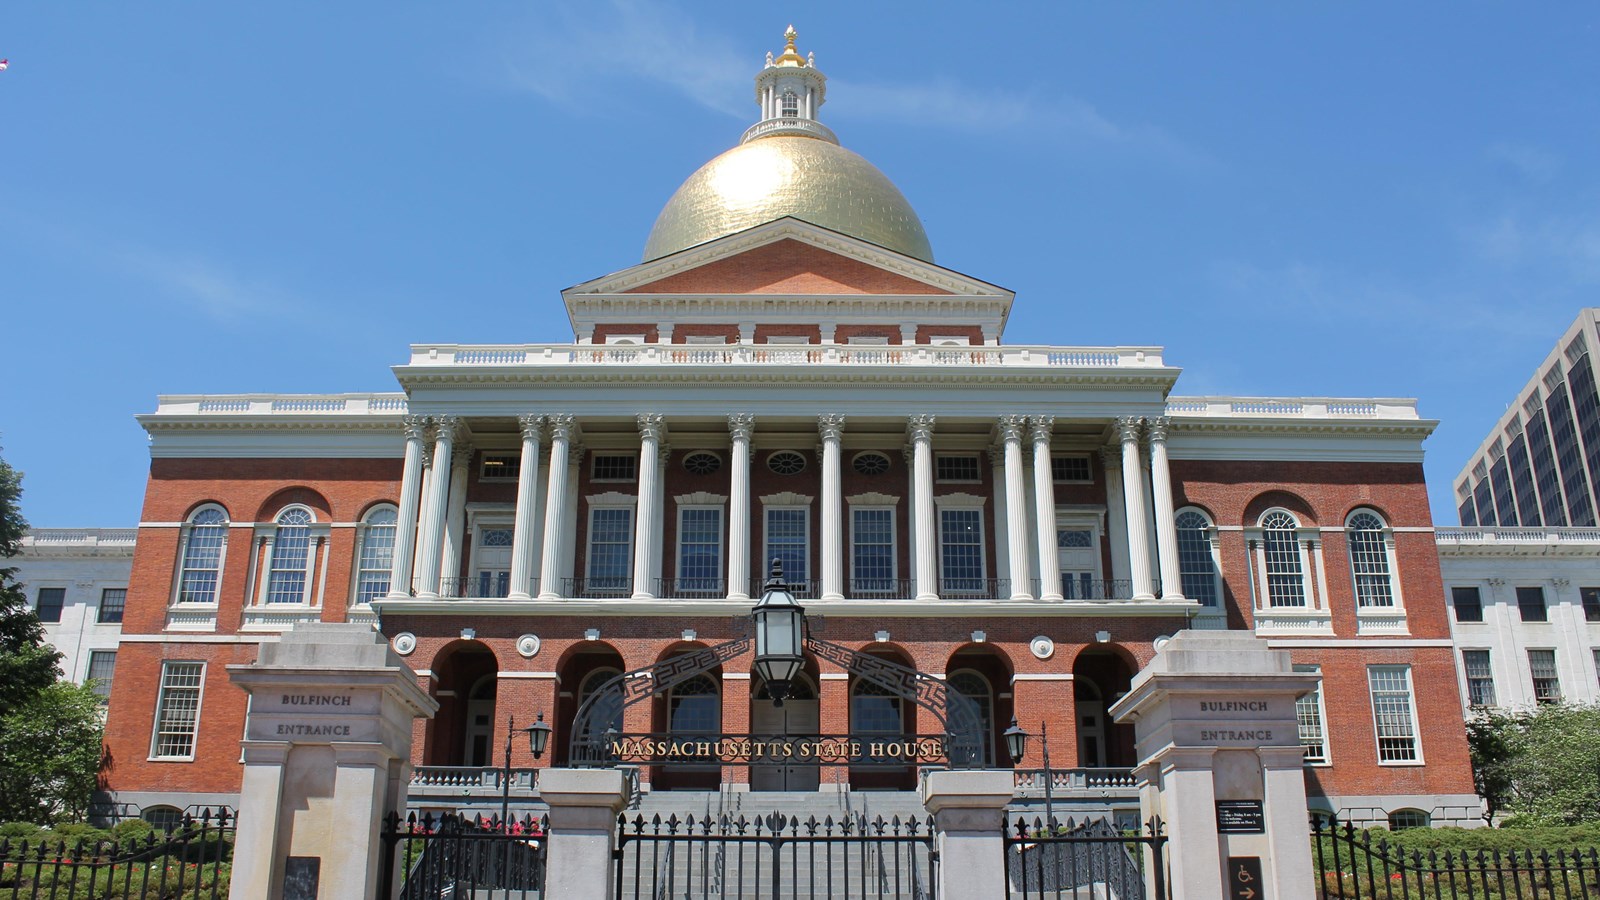 Red brick and white trimmed State House with a gold dome against a blue sky.